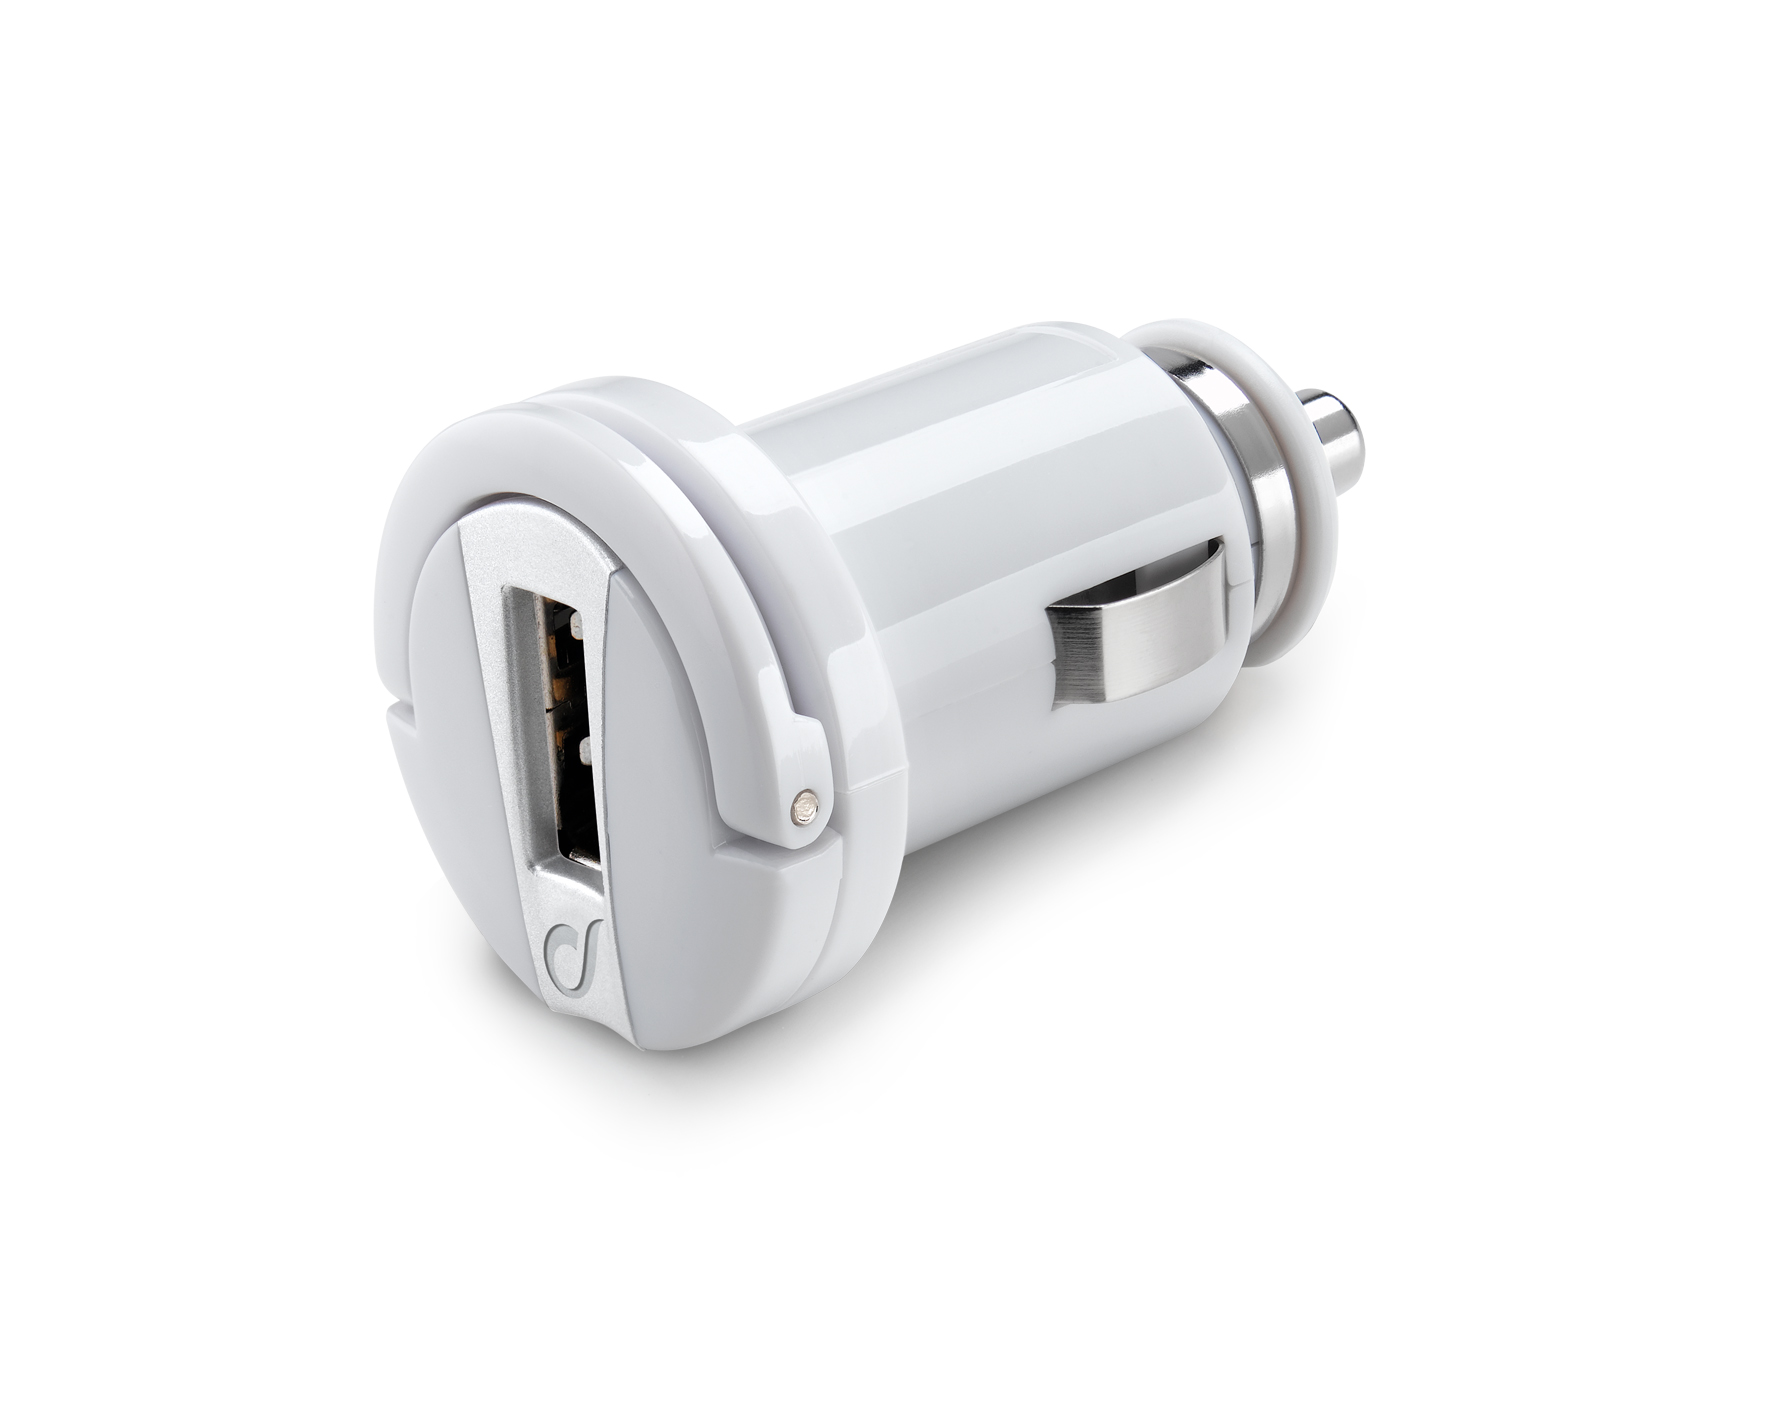 Chargeur voiture usb, 10W/2A Apple, blanc